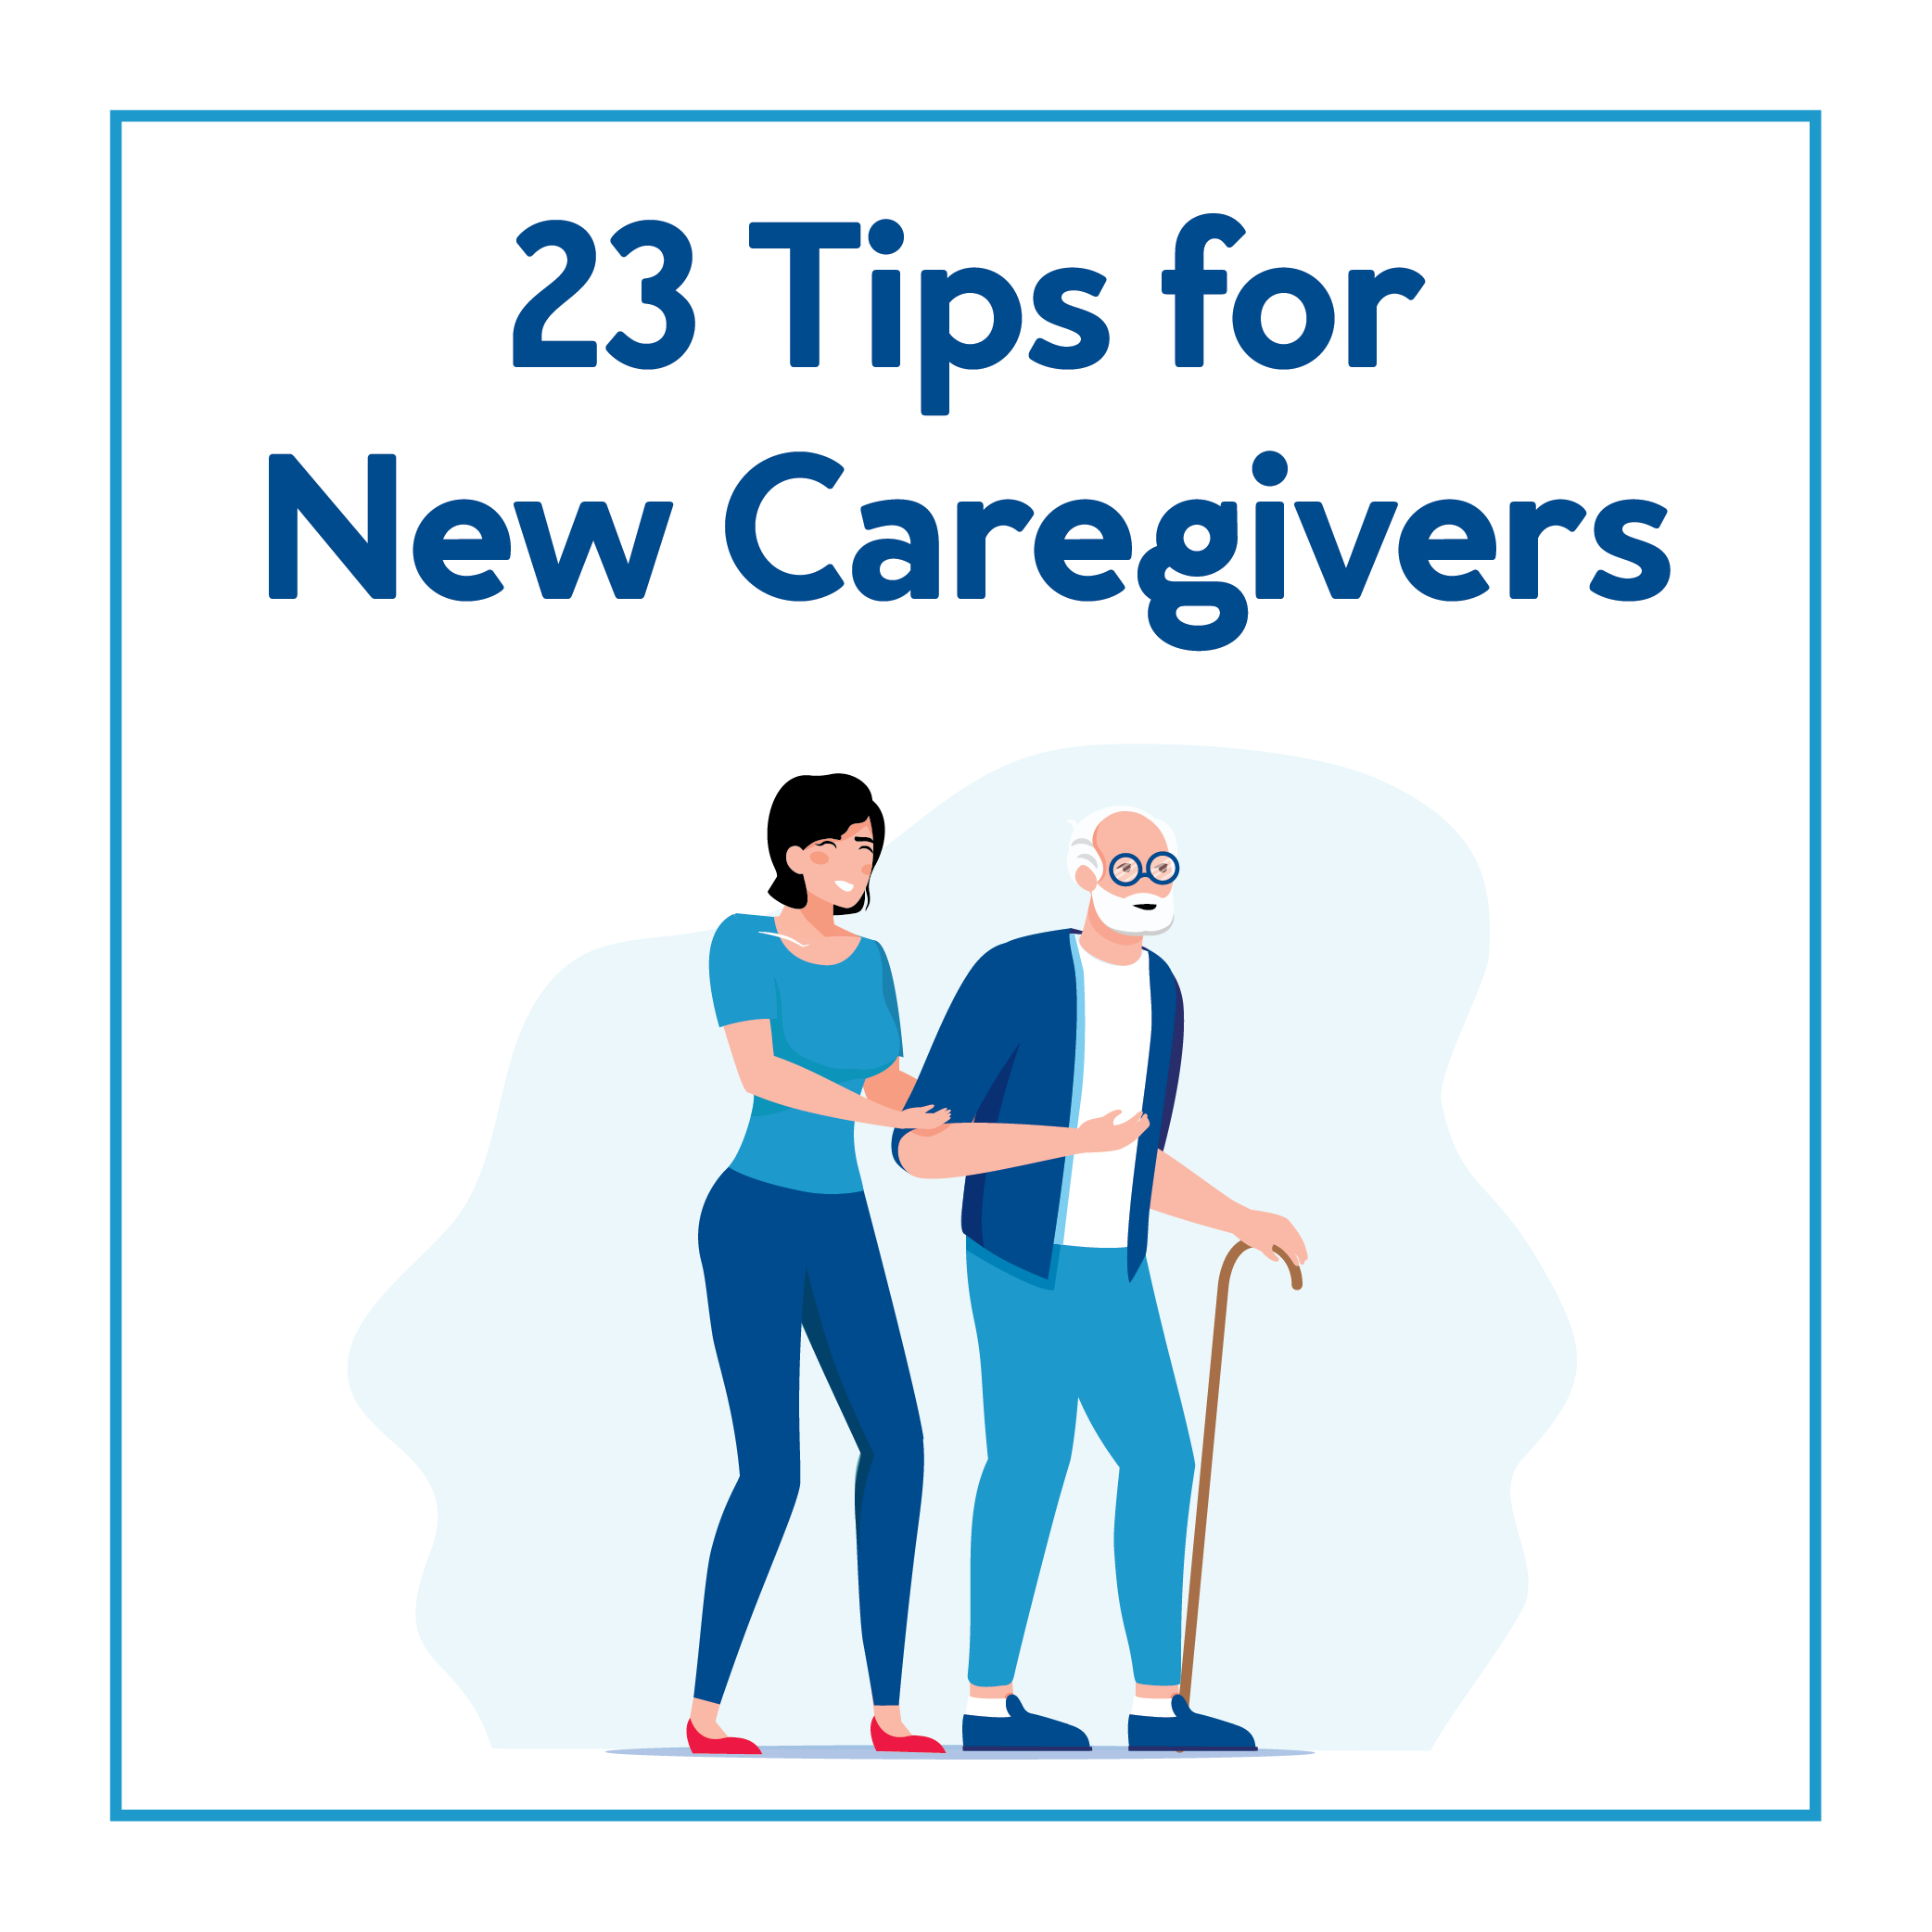 23 Tips for New Caregivers